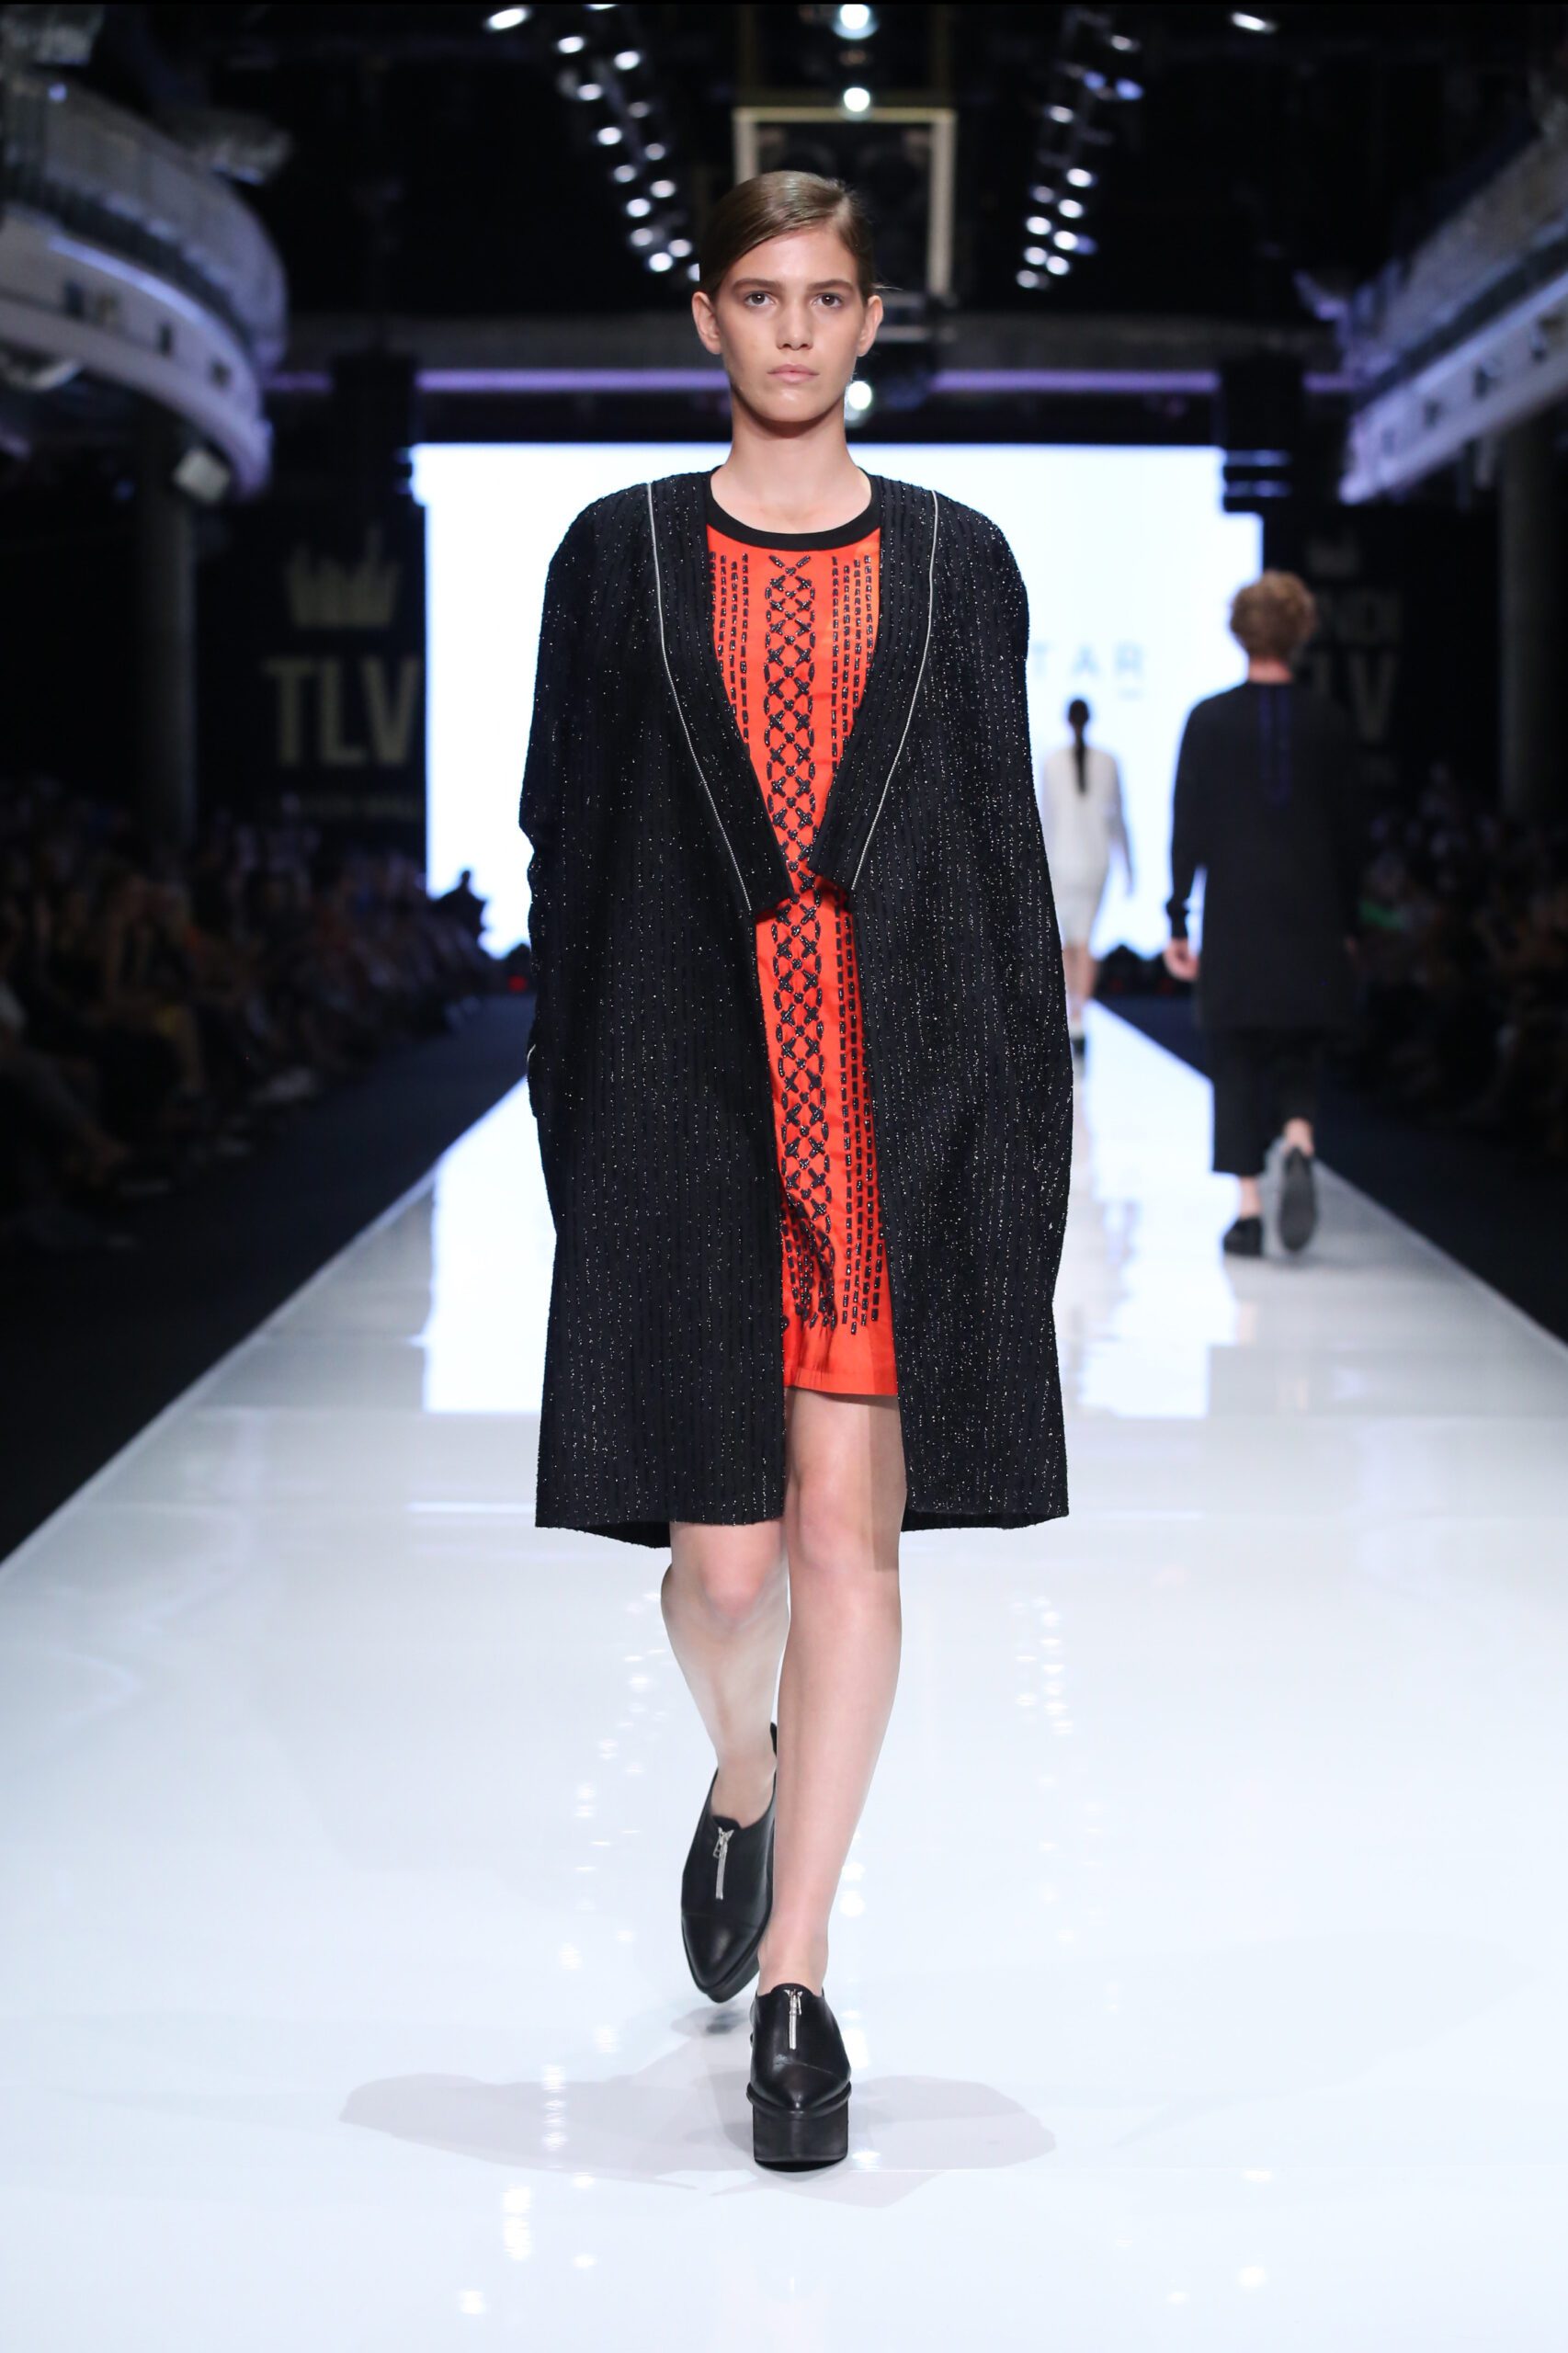 PHOTOS FROM TLV FASHION WEEK 2015 | NORMAN & BELLA X NORTHERN STAR ...